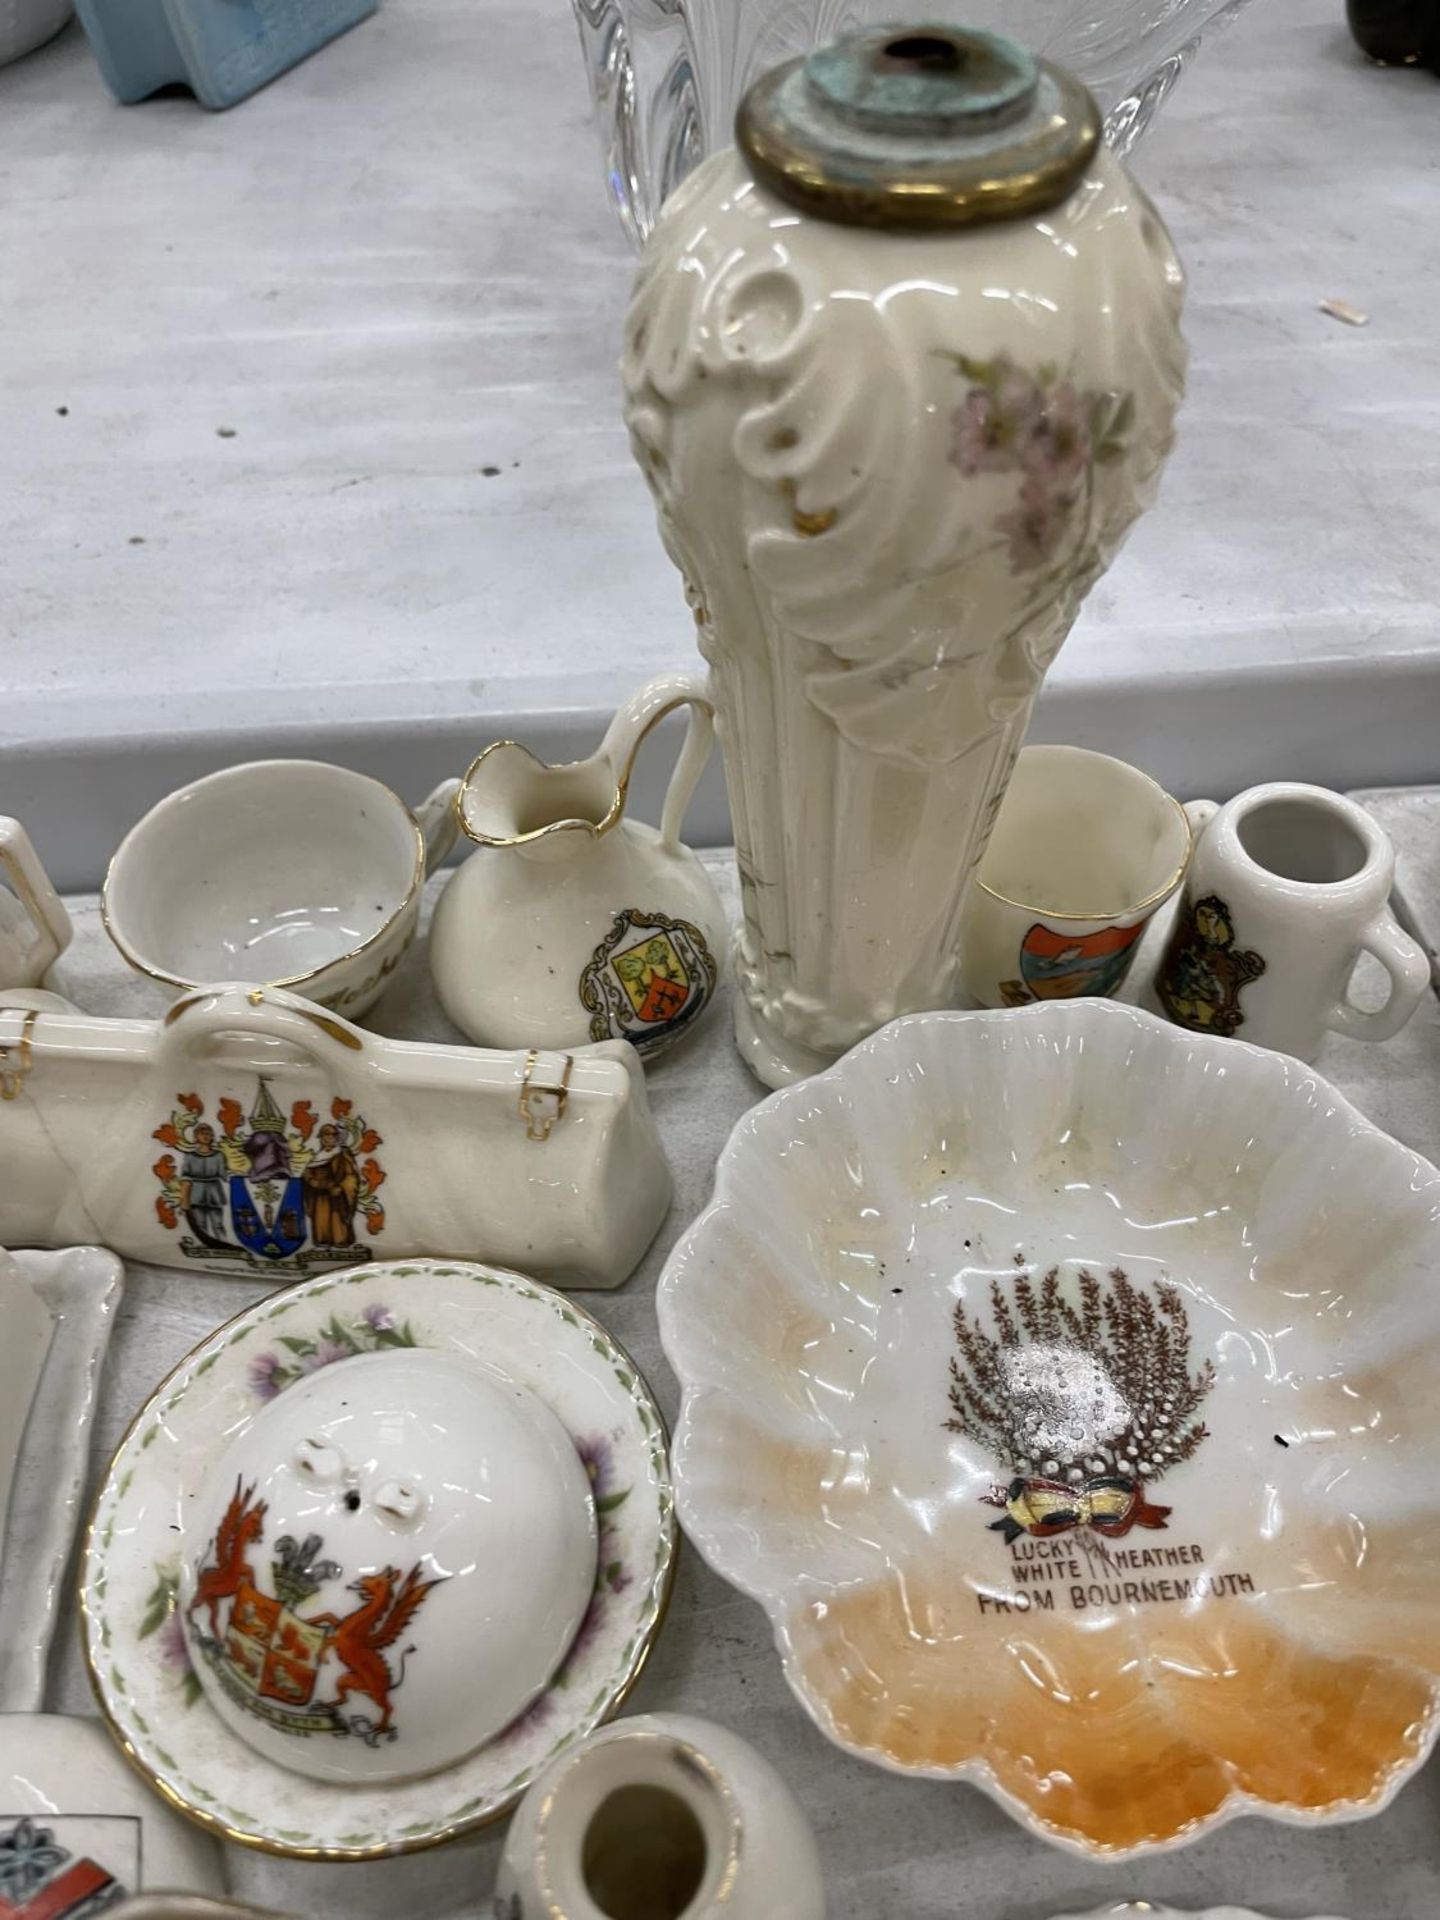 A LARGE QUANTITY OF CRESTED WARE TO INCLUDE MINIATURE CHEESE DISHES, PLATES, VASES, CUPS, JUGS, ETC - Image 7 of 11